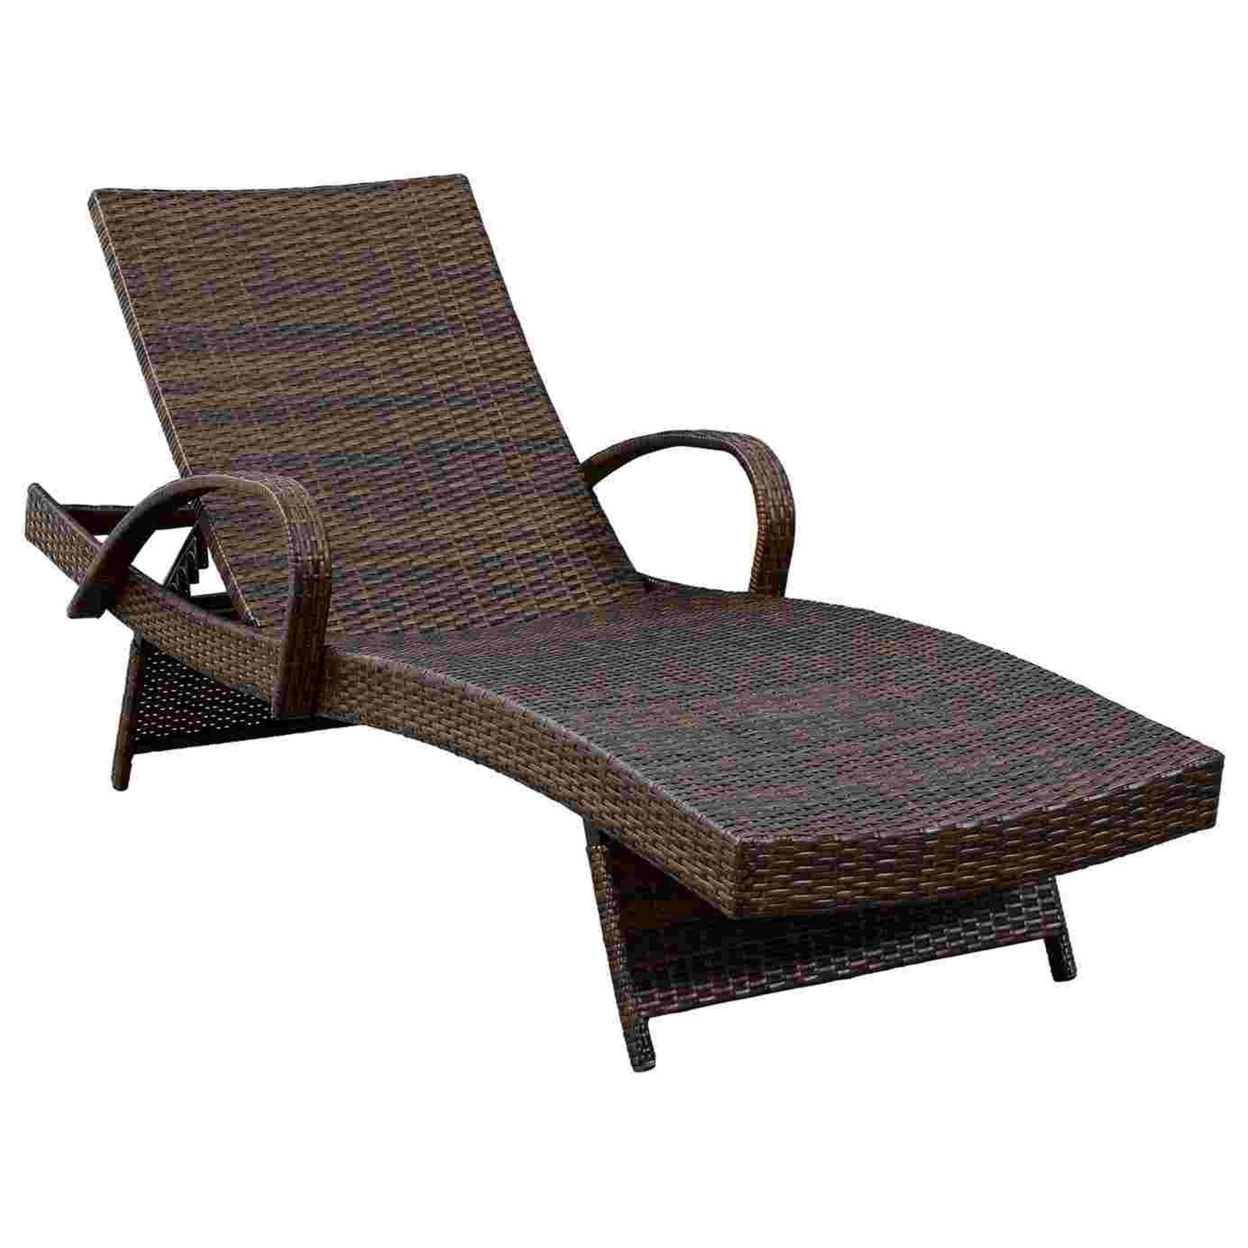 Reclining Chaise Lounge With Wicker Frame, Set Of 2, Brown- Saltoro Sherpi